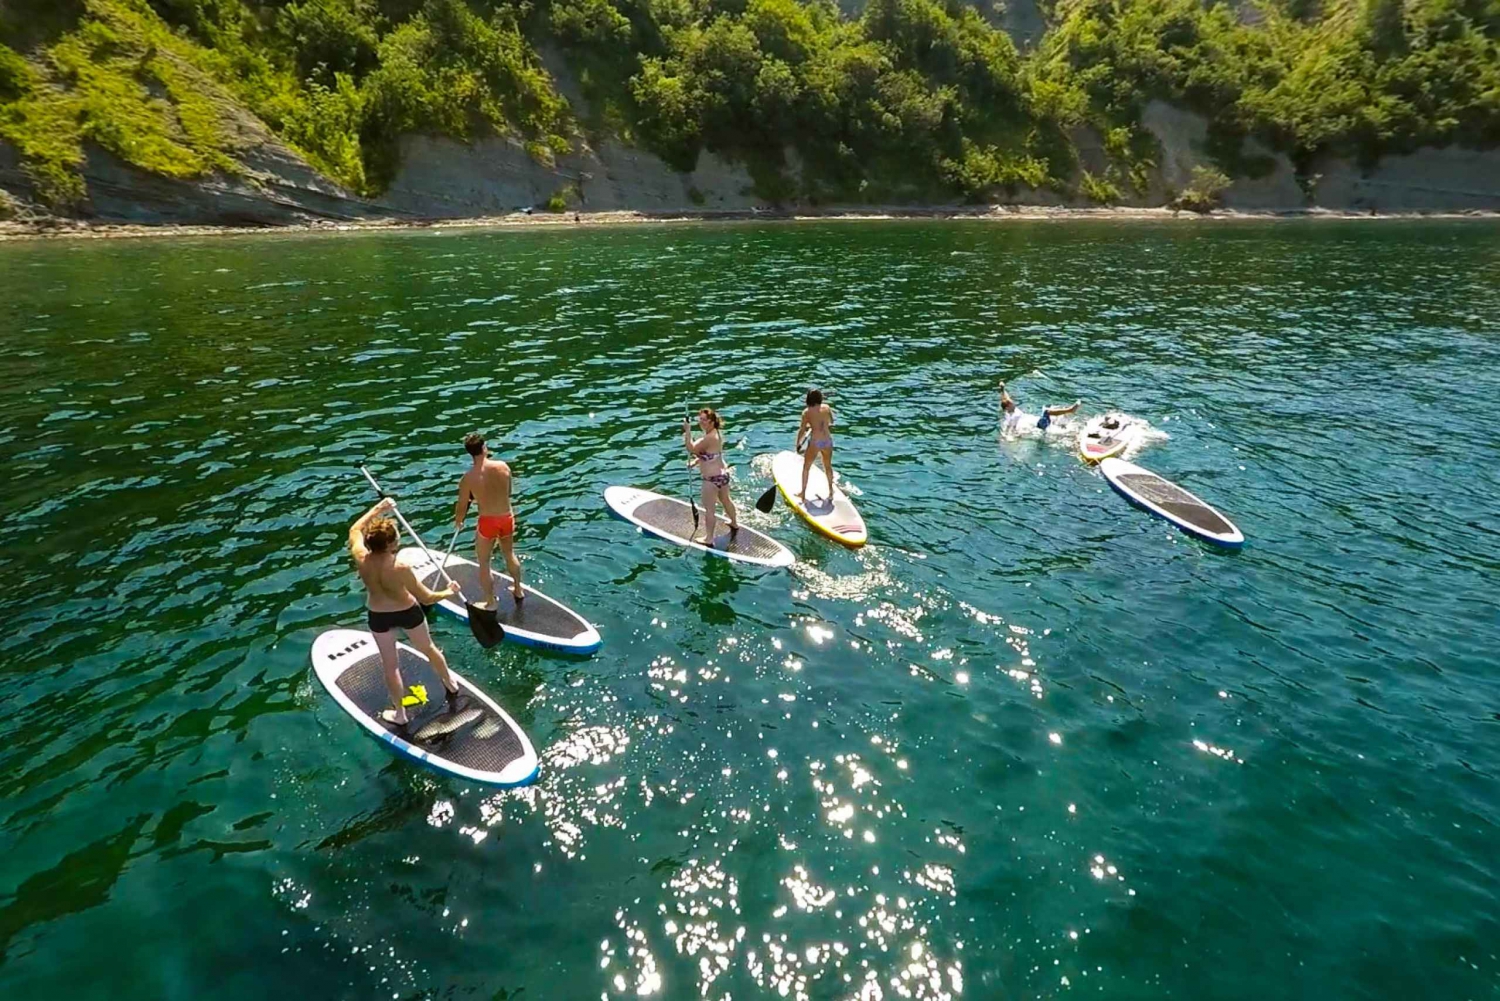 SUP Adventure: Paddle through the Magical Moon Bay